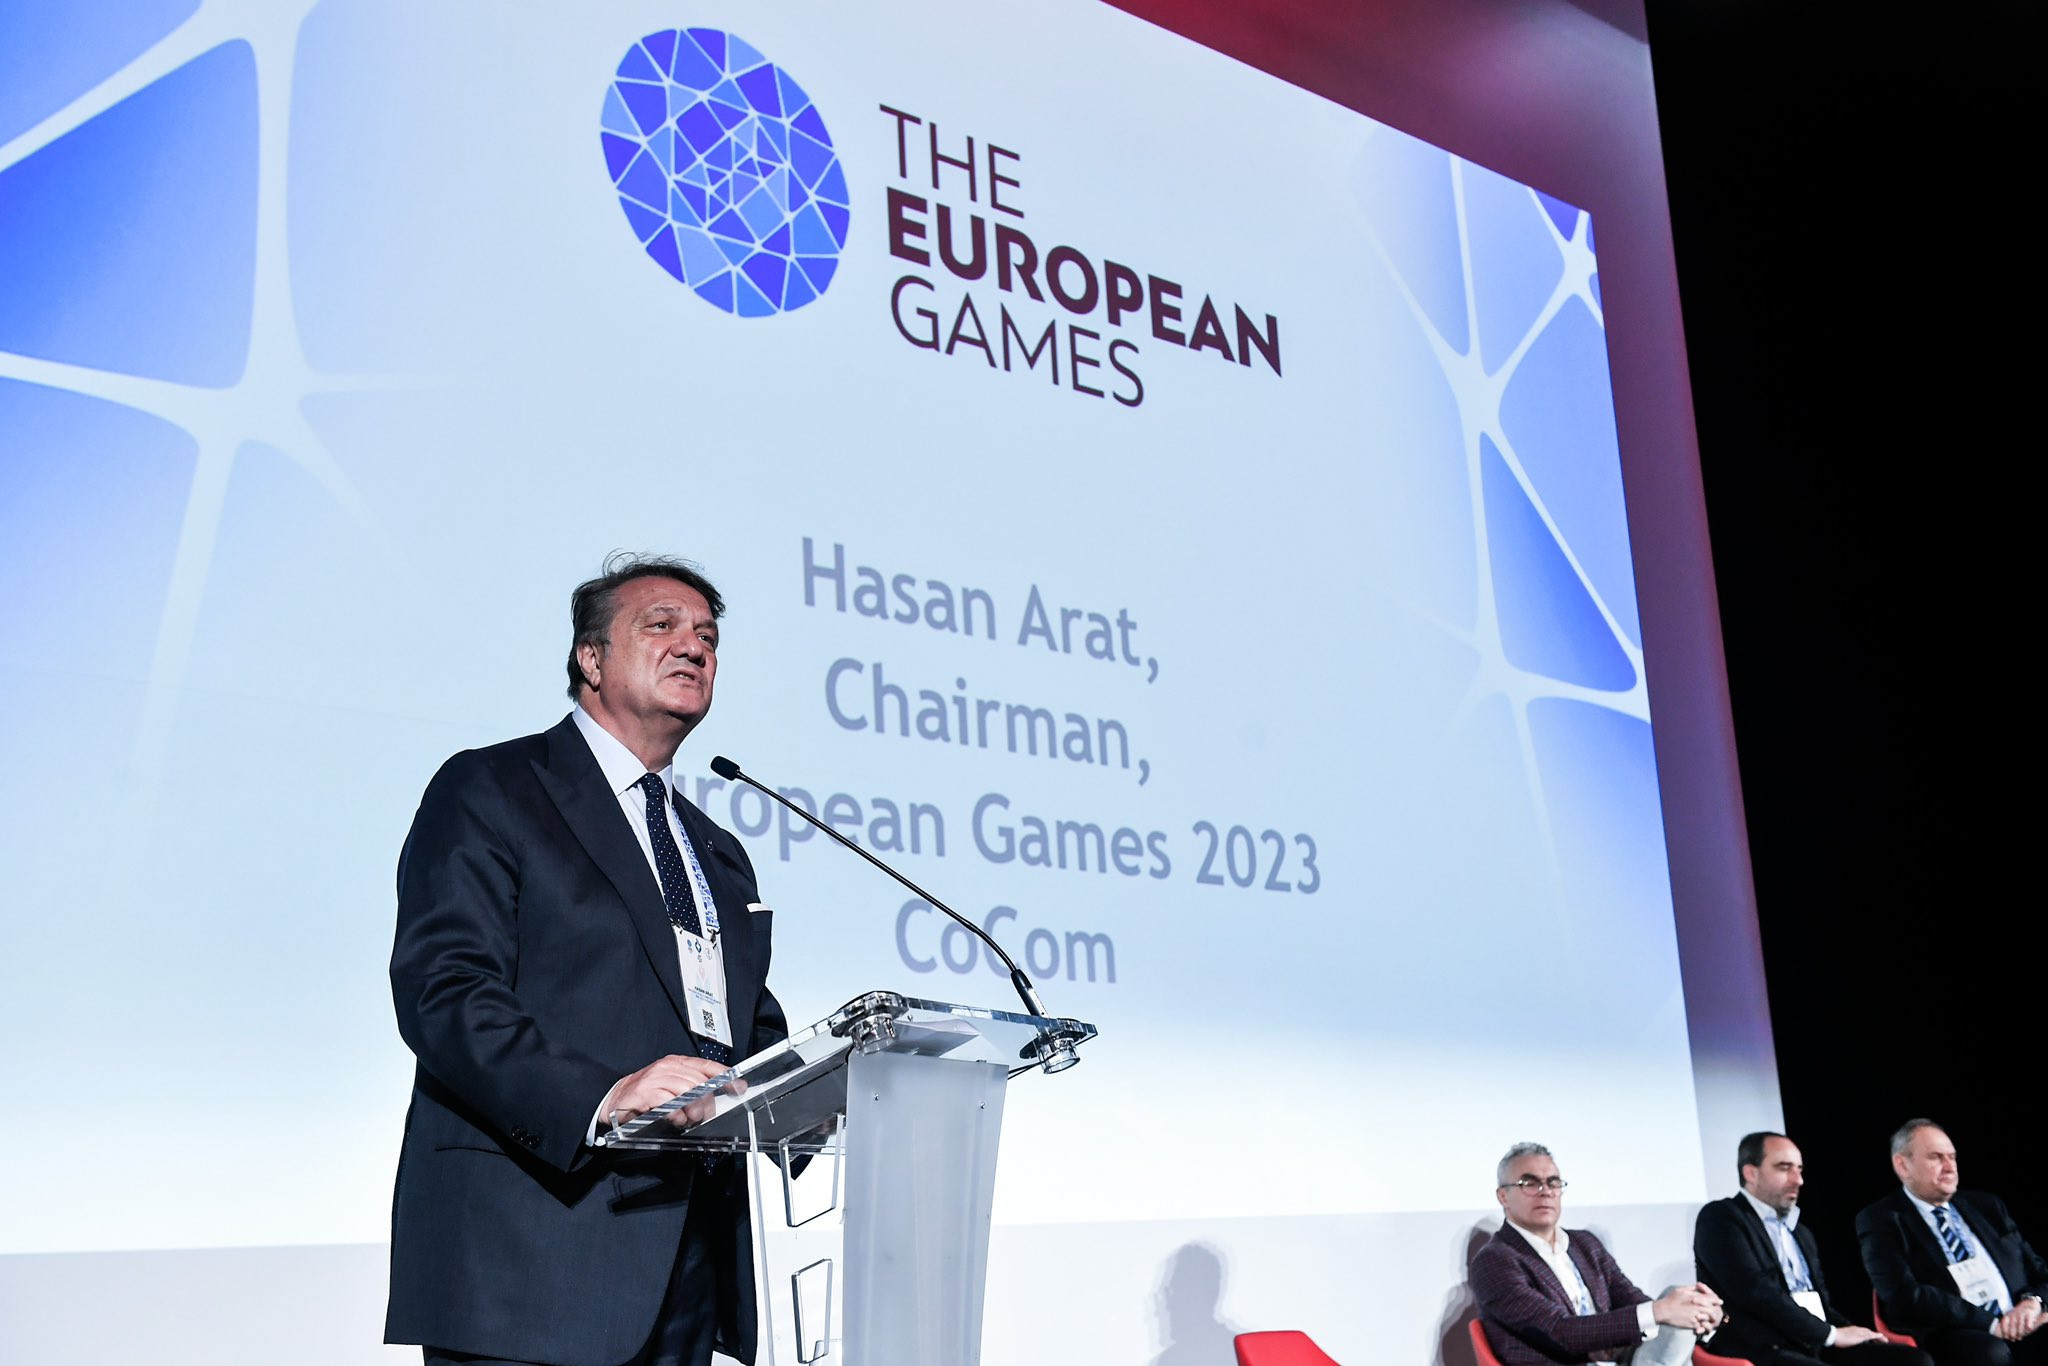 Hasan Arat, chair of the European 2023 Games Coordination Commission, took on board suggestions about reforming the sport programming of future editions while pointing out the 